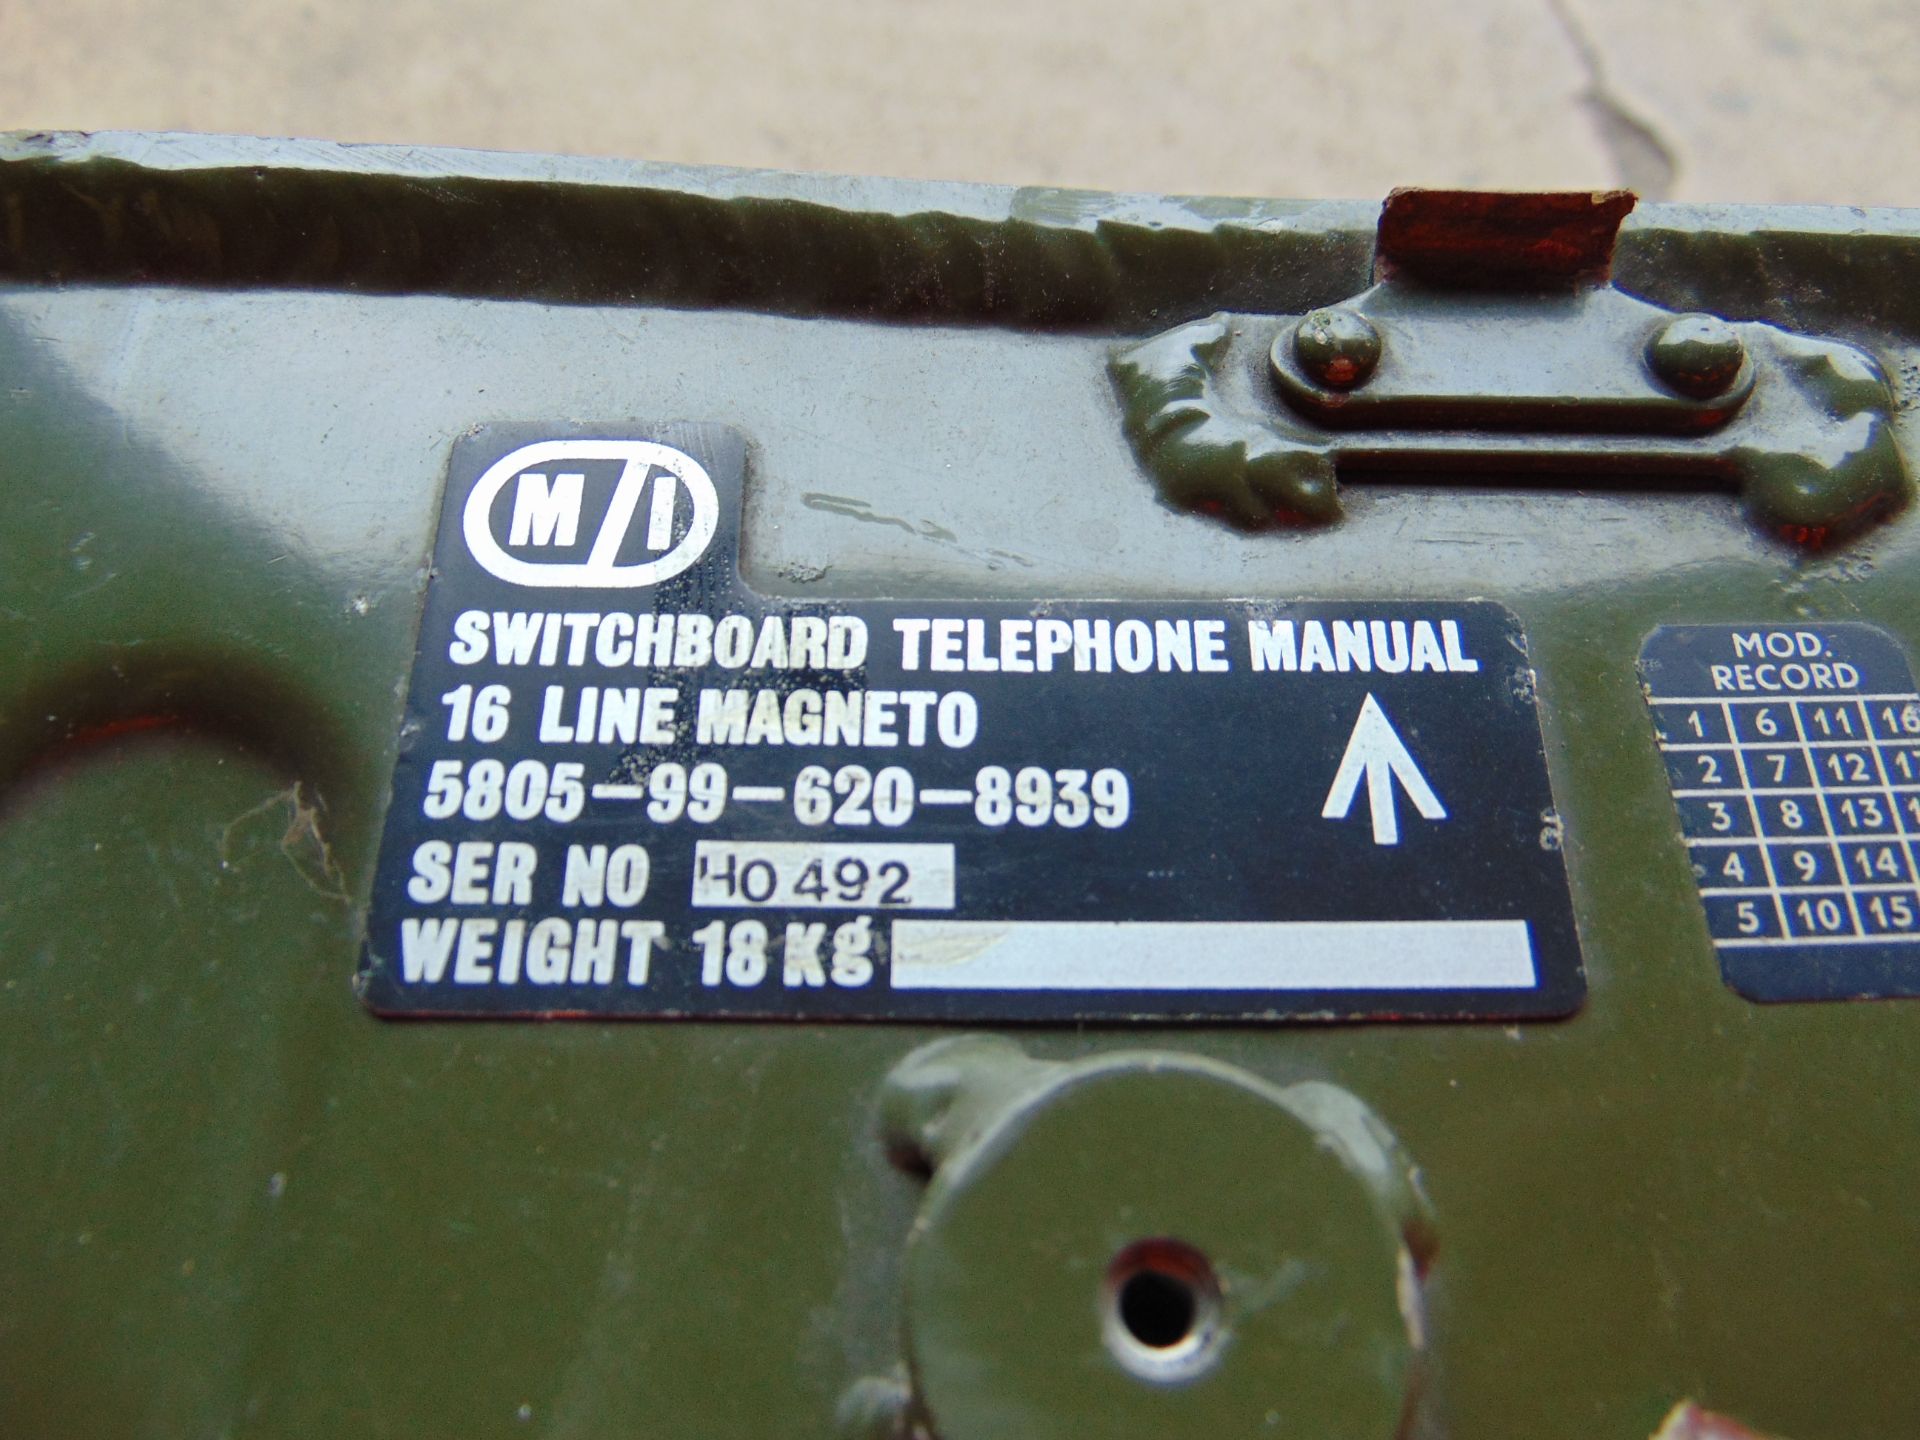 Clansman Switchboard Telephone 16 line Magneto - Image 5 of 5